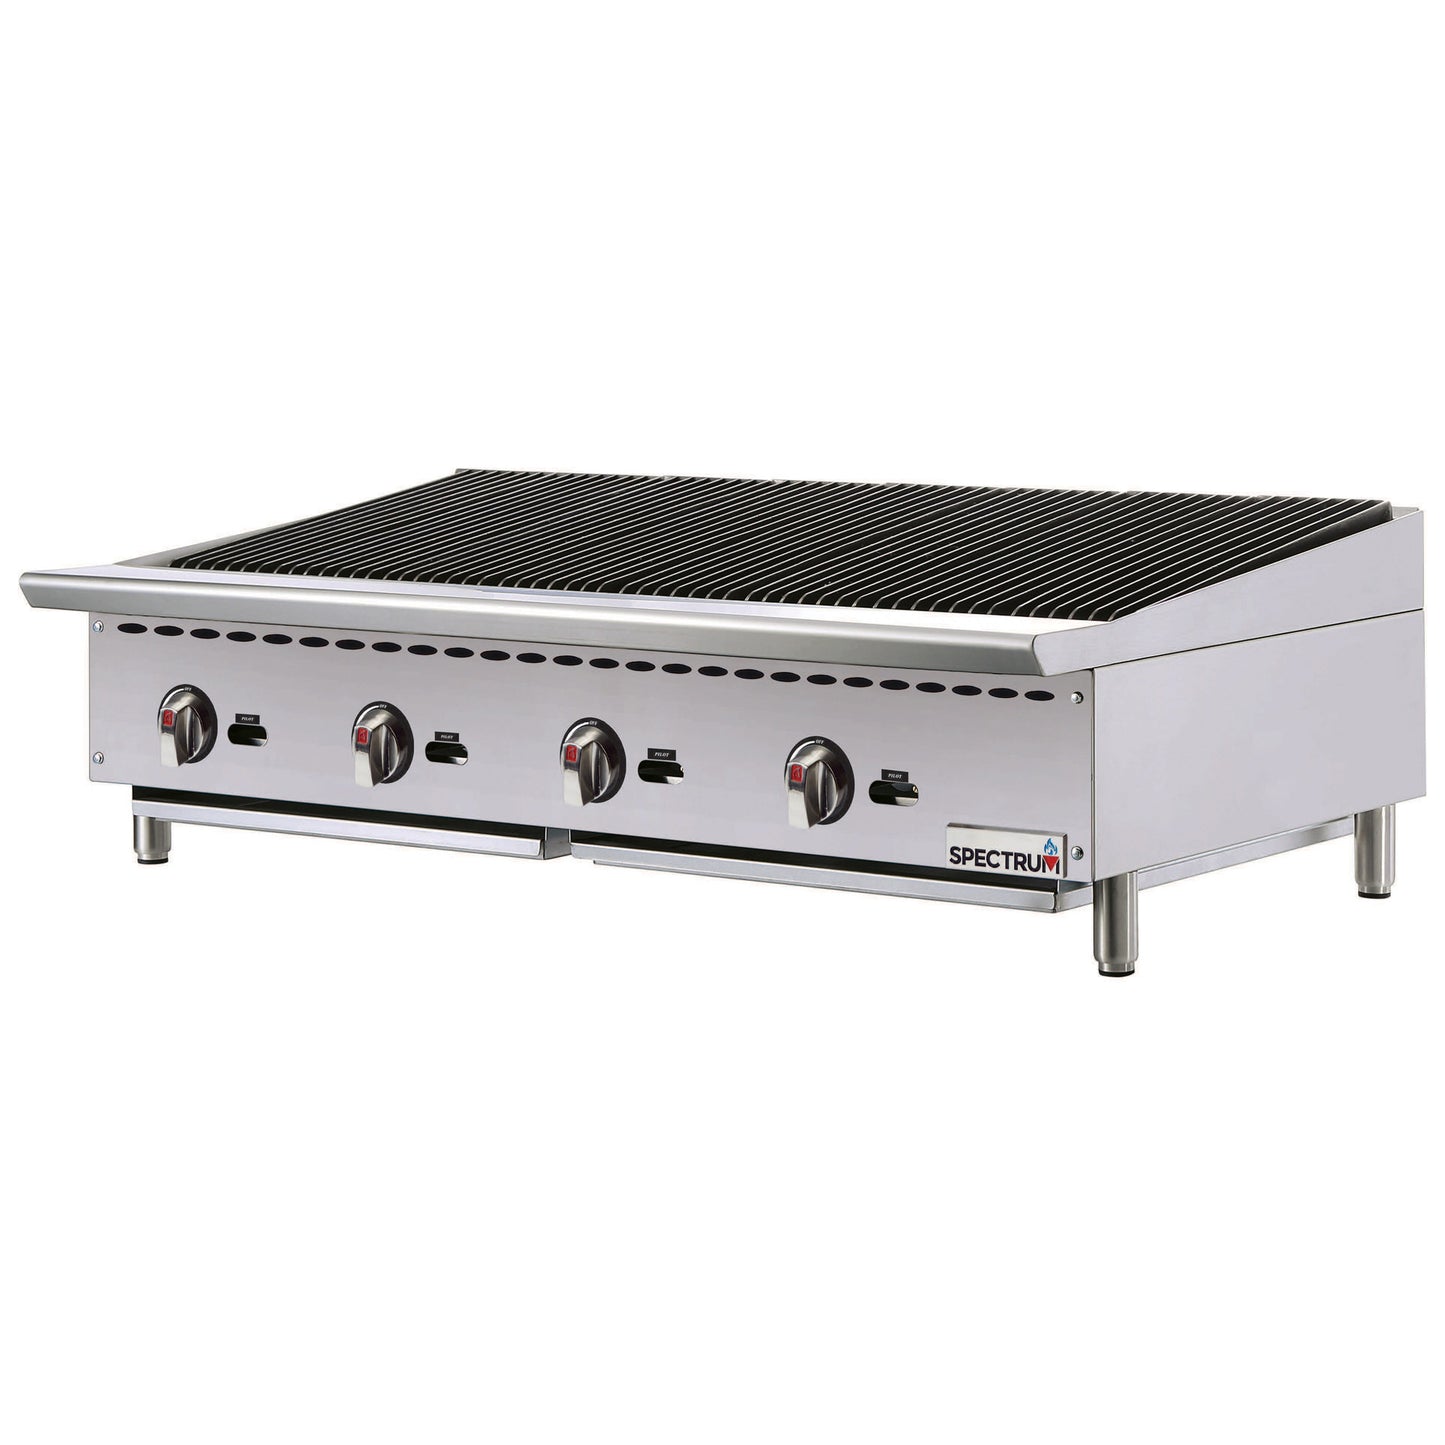 NGCB-48R - Spectrum Gas Charbroiler, 48" Wide, Natural / LP